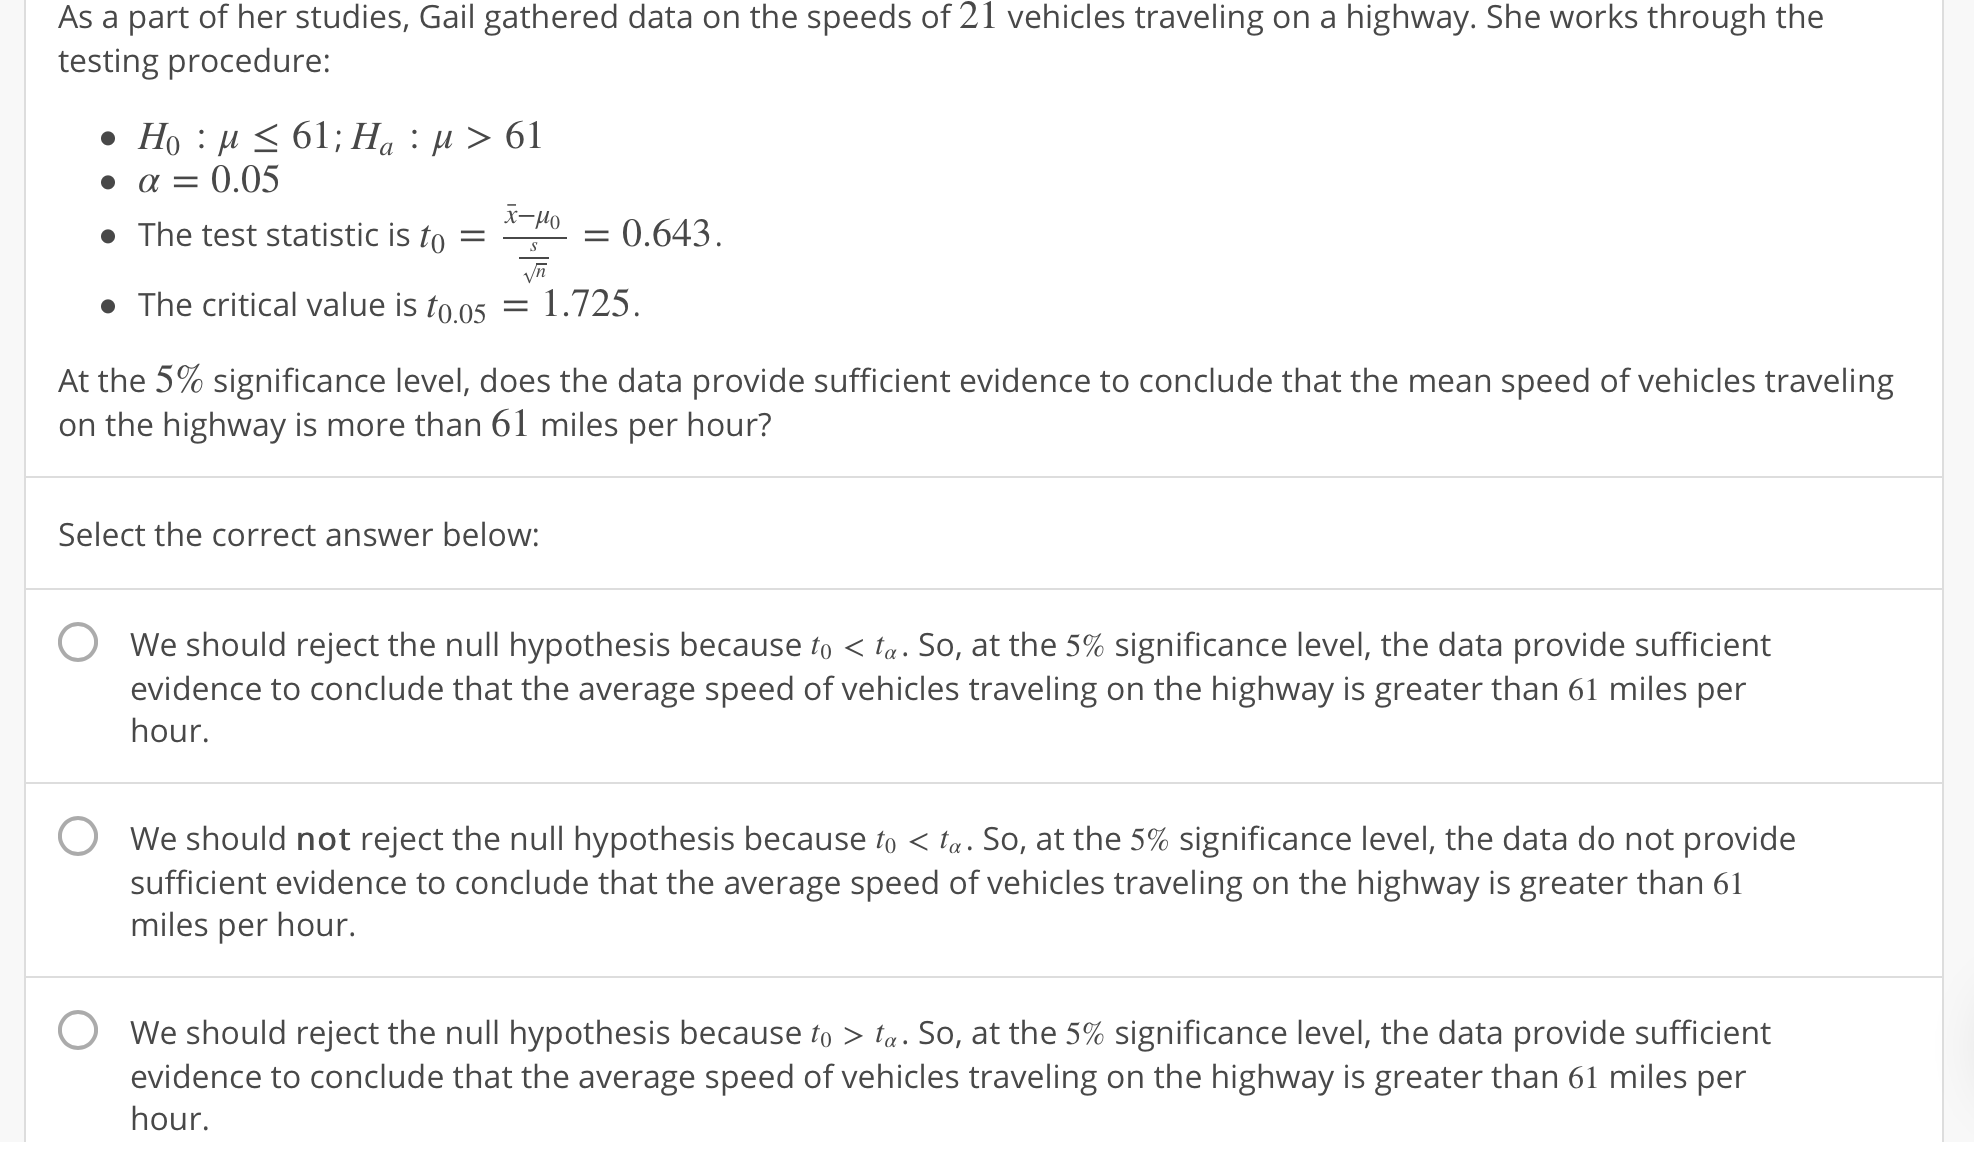 21
As a part of her studies, Gail gathered data on the speeds of
testing procedure:
vehicles traveling on a highway. She works through the
α 0.05
The test statistic is to 0.643
The critical value is too5 1.725.
At the 5% significance level, does the data provide sufficient evidence to conclude that the mean speed of vehicles traveling
on the highway is more than 61 miles per hour?
Select the correct answer below:
O
We should reject the null hypothesis because to < ta. So, at the 5% significance level, the data provide sufficient
evidence to conclude that the average speed of vehicles traveling on the highway is greater than 61 miles per
hour.
O
We should not reject the null hypothesis because o < a. So, at the 5% significance level, the data do not provide
sufficient evidence to conclude that the average speed of vehicles traveling on the highway is greater than 61
miles per hour.
O
We should reject the null hypothesis because to > ta. So, at the 5% significance level, the data provide sufficient
evidence to conclude that the average speed of vehicles traveling on the highway is greater than 61 miles per
hour.
